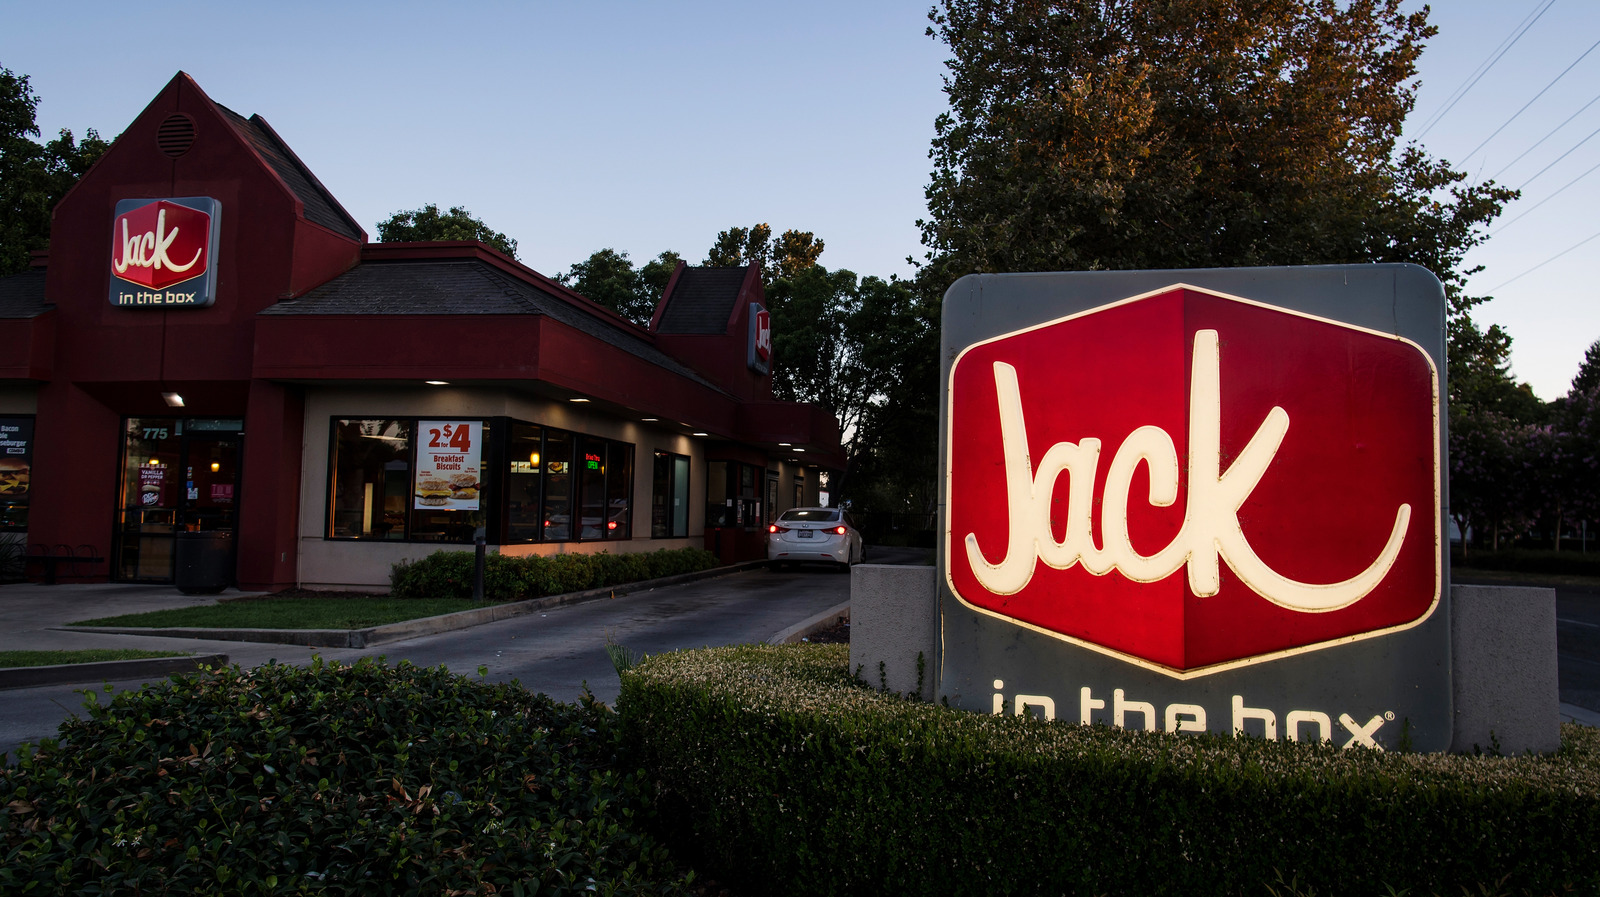 how did the jack in the box get its name and where does the term jack in the box come from